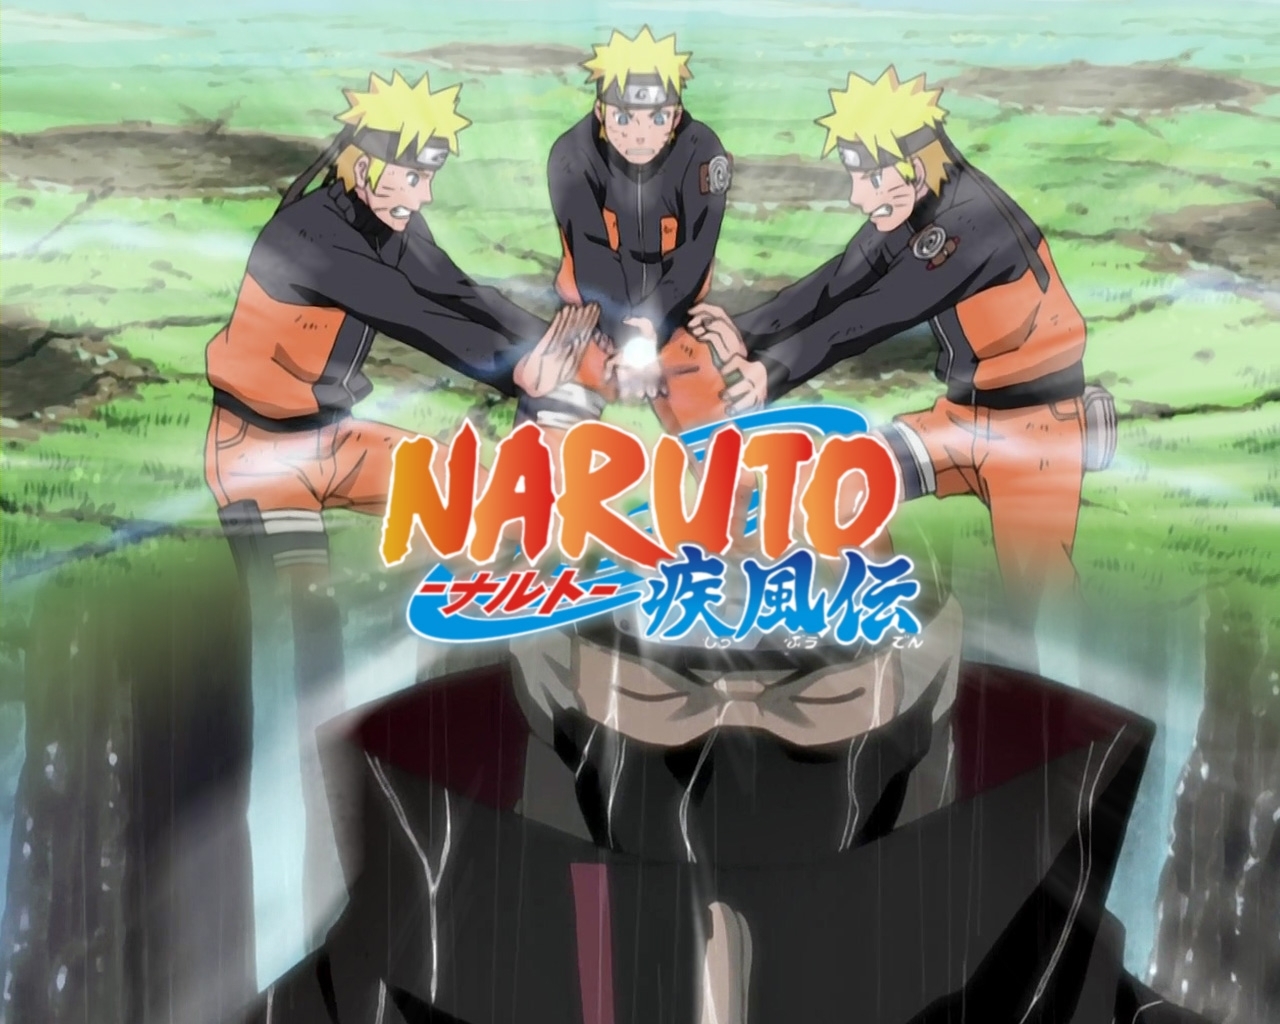 1979 download wallpaper naruto, cartoon, anime, men screensavers and pictures for free